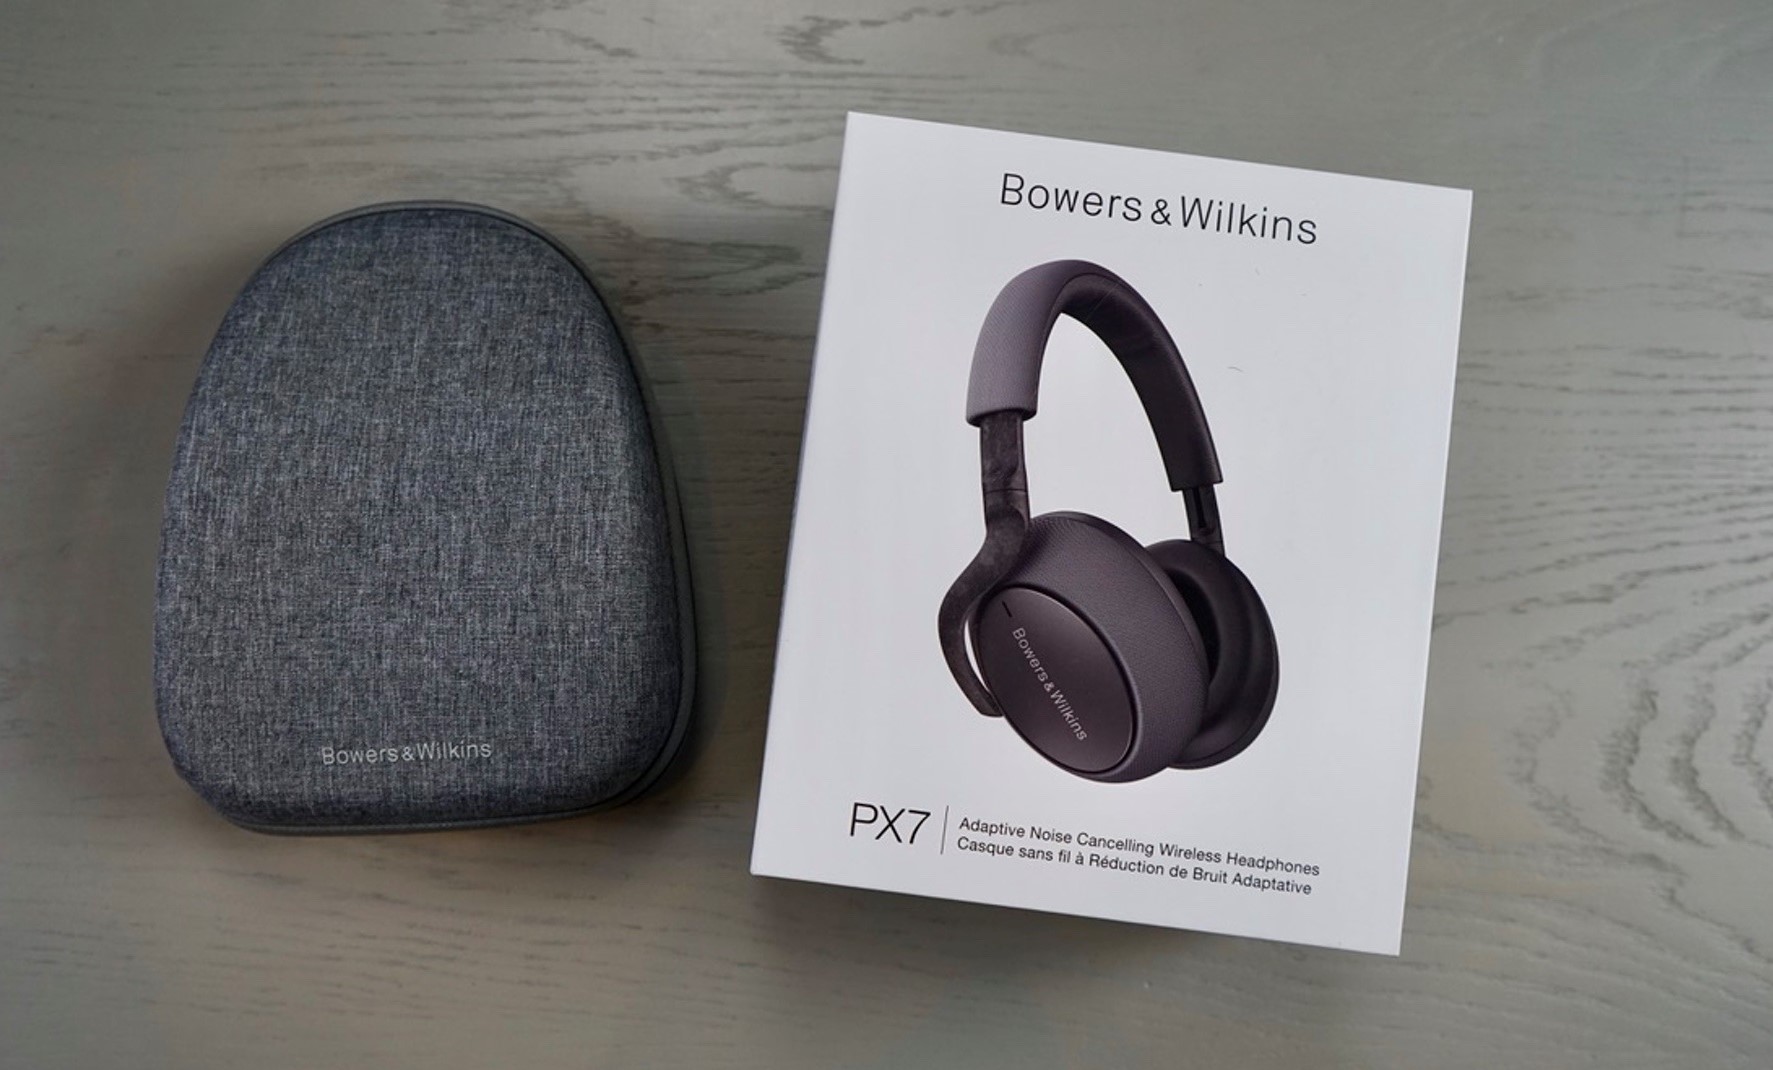 Sound of Bowers & Wilkins PX7